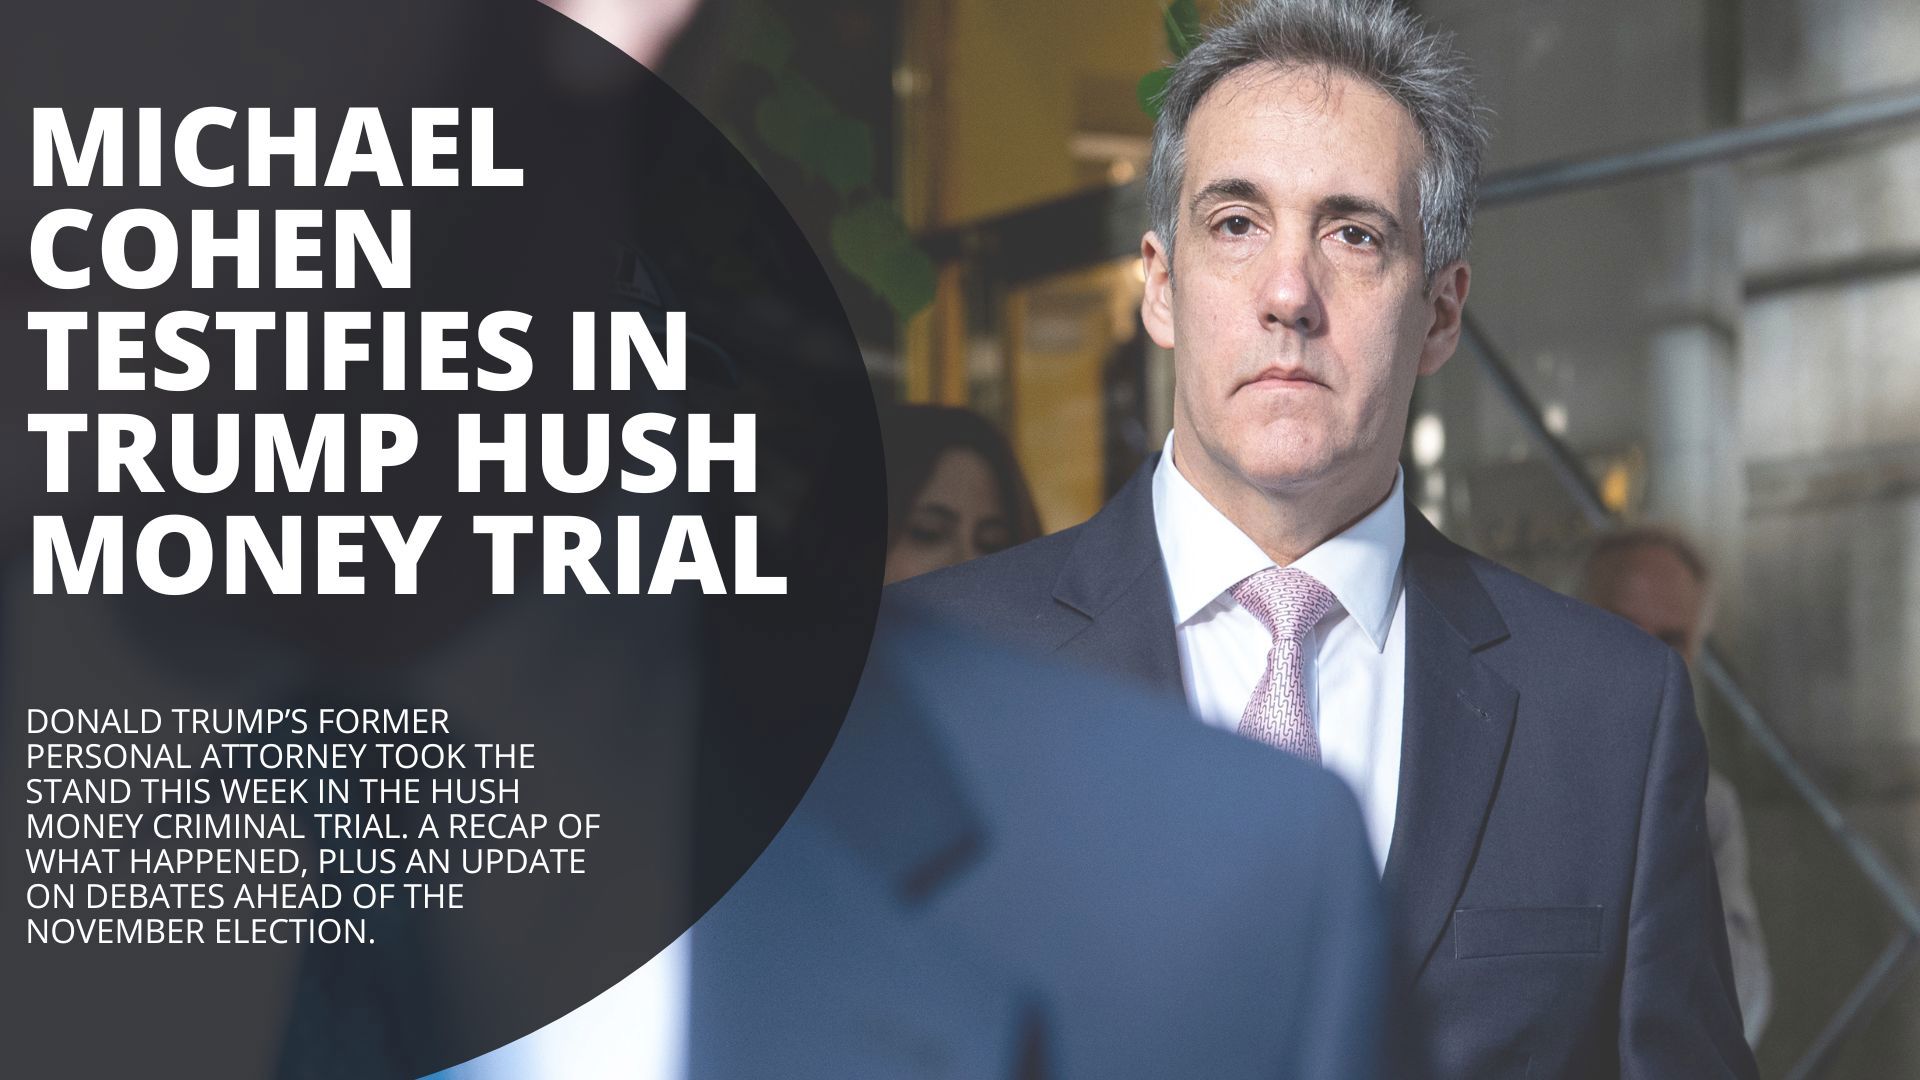 Donald Trump’s former personal attorney took the stand this week in the hush money criminal trial. A recap of the trial so far, plus big debate news.